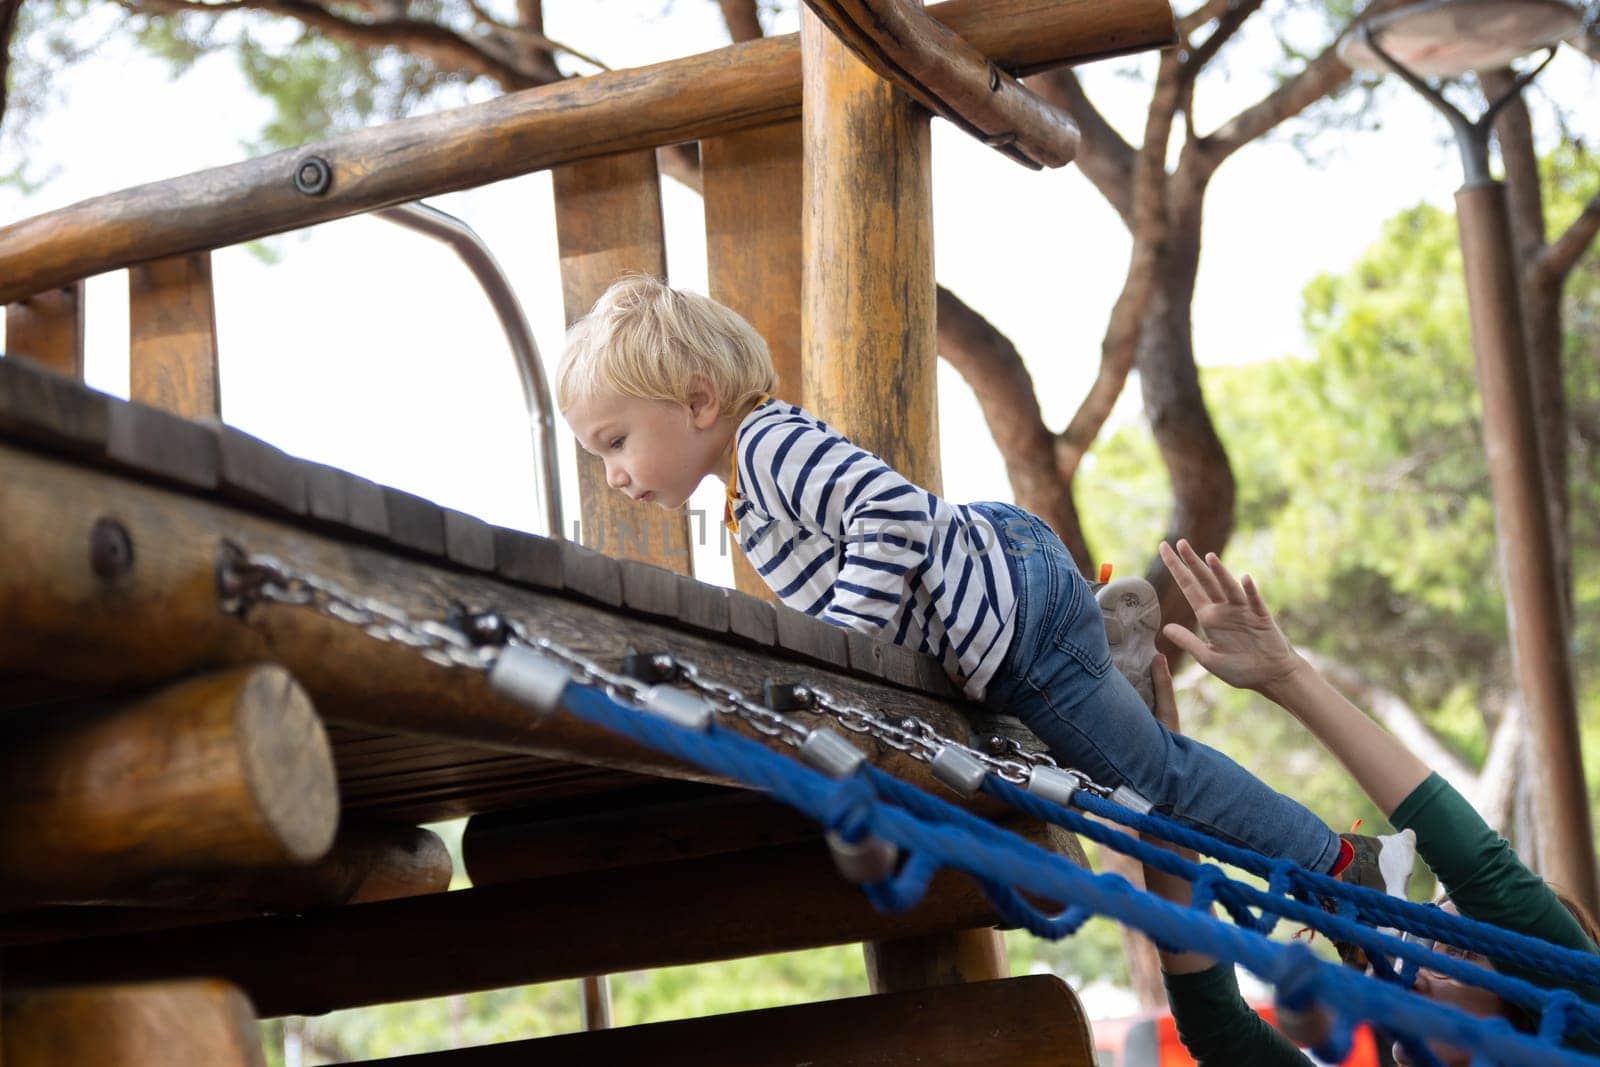 A little boy climbs ropes on a wooden installation at the playground. Mid shot